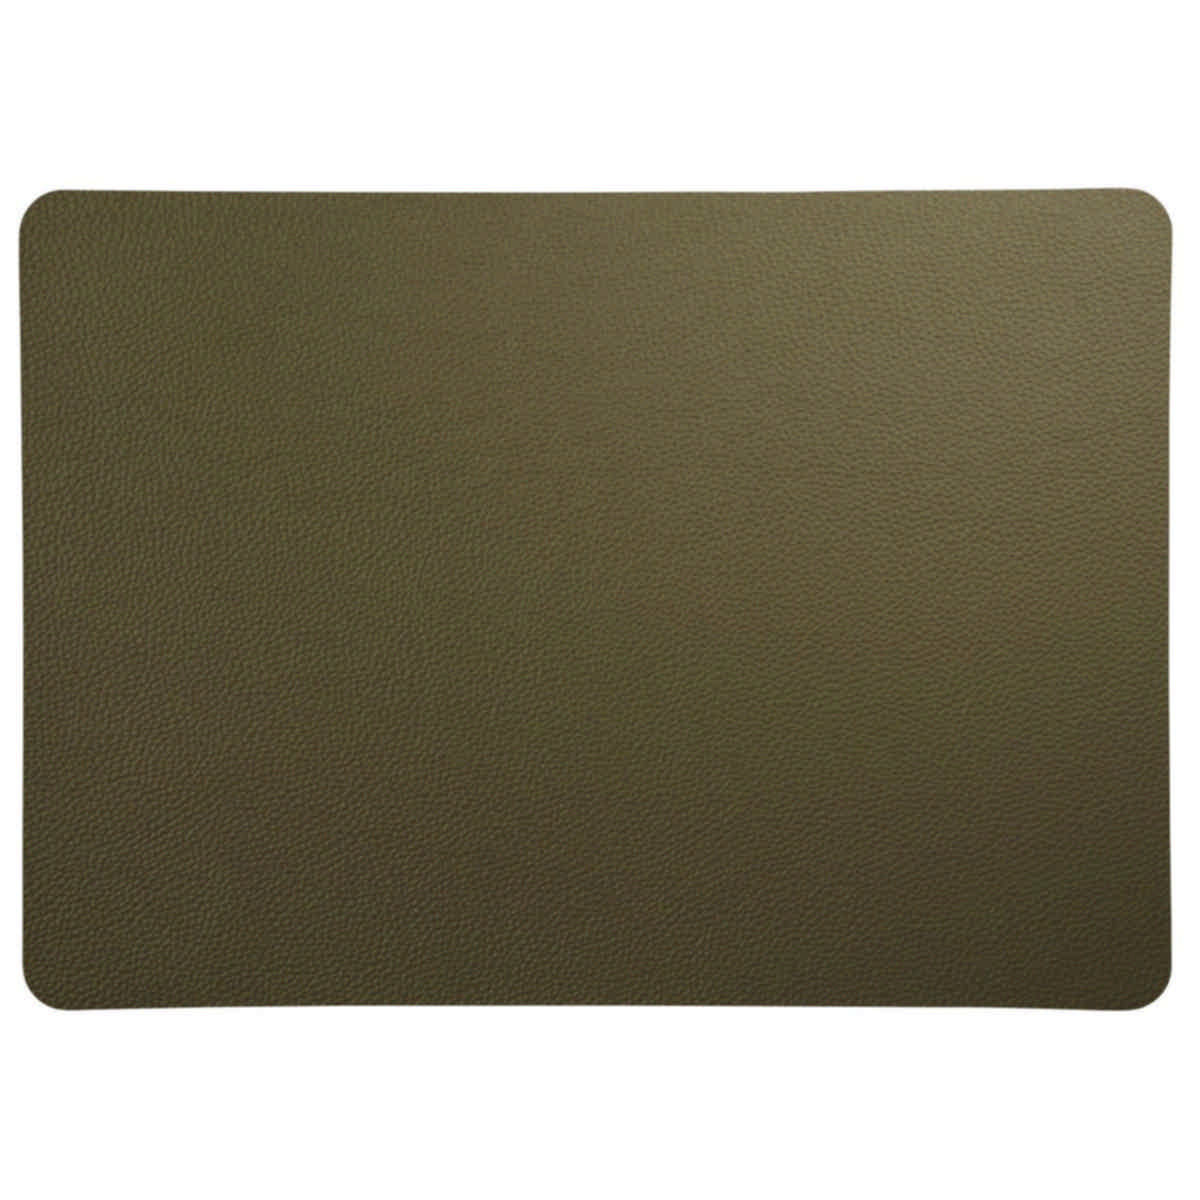 163673808 - Asa Selection Placemat rough olive leather optic, 46*33 cm (8803420)